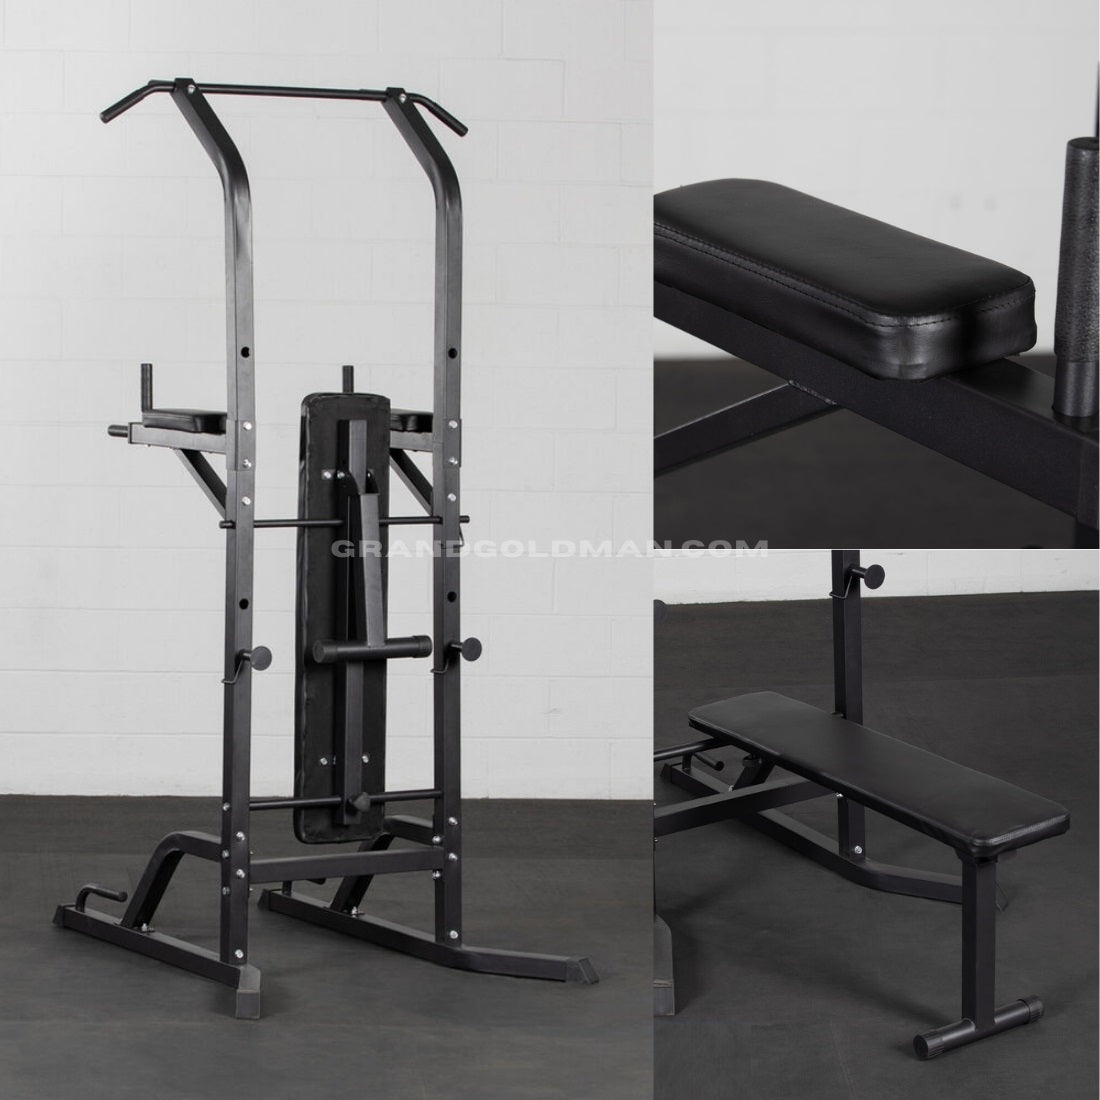 TITAN FITNESS Power Tower With Bench - Best dip bars and pull up stations Reviews - GRANDGOLDMAN.COM